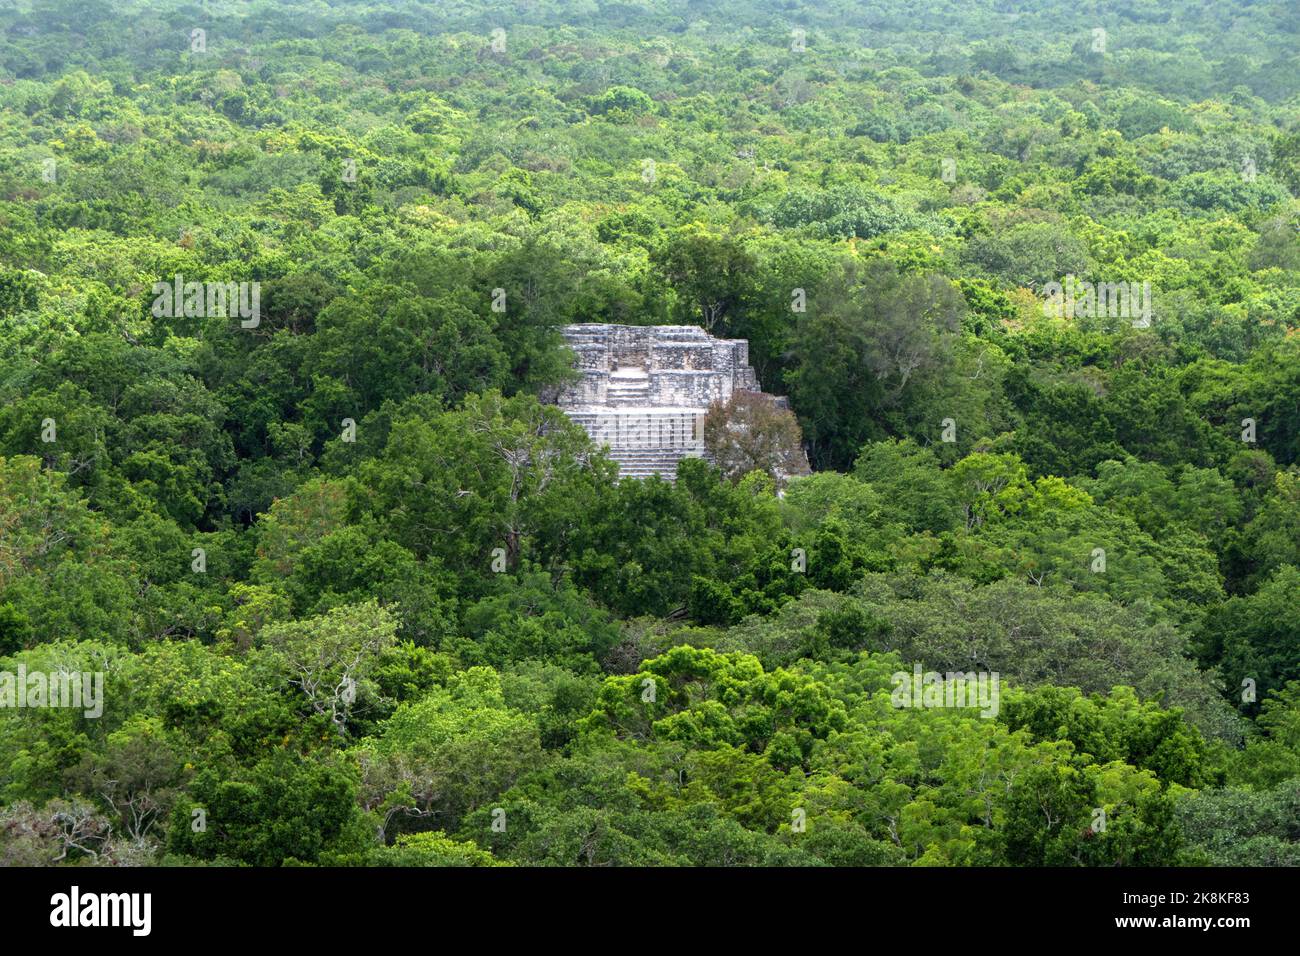 View of Calakmul, a Maya archeological site in the jungles of the Mexican state of Campeche. Structure 1 (or Structure I) seen from Structure 2 Stock Photo